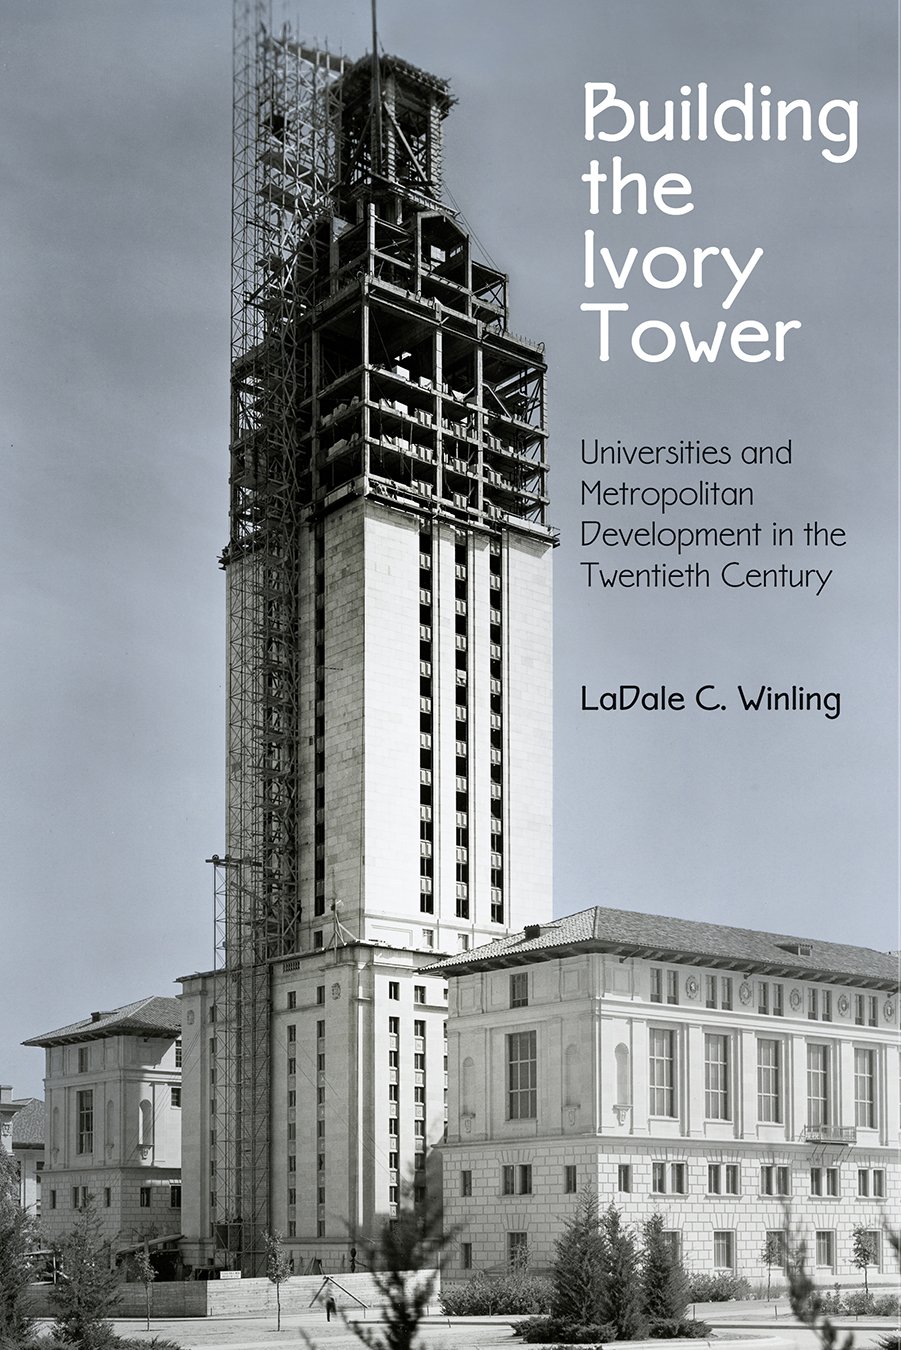 Building the Ivory Tower | LaDale C. Winling